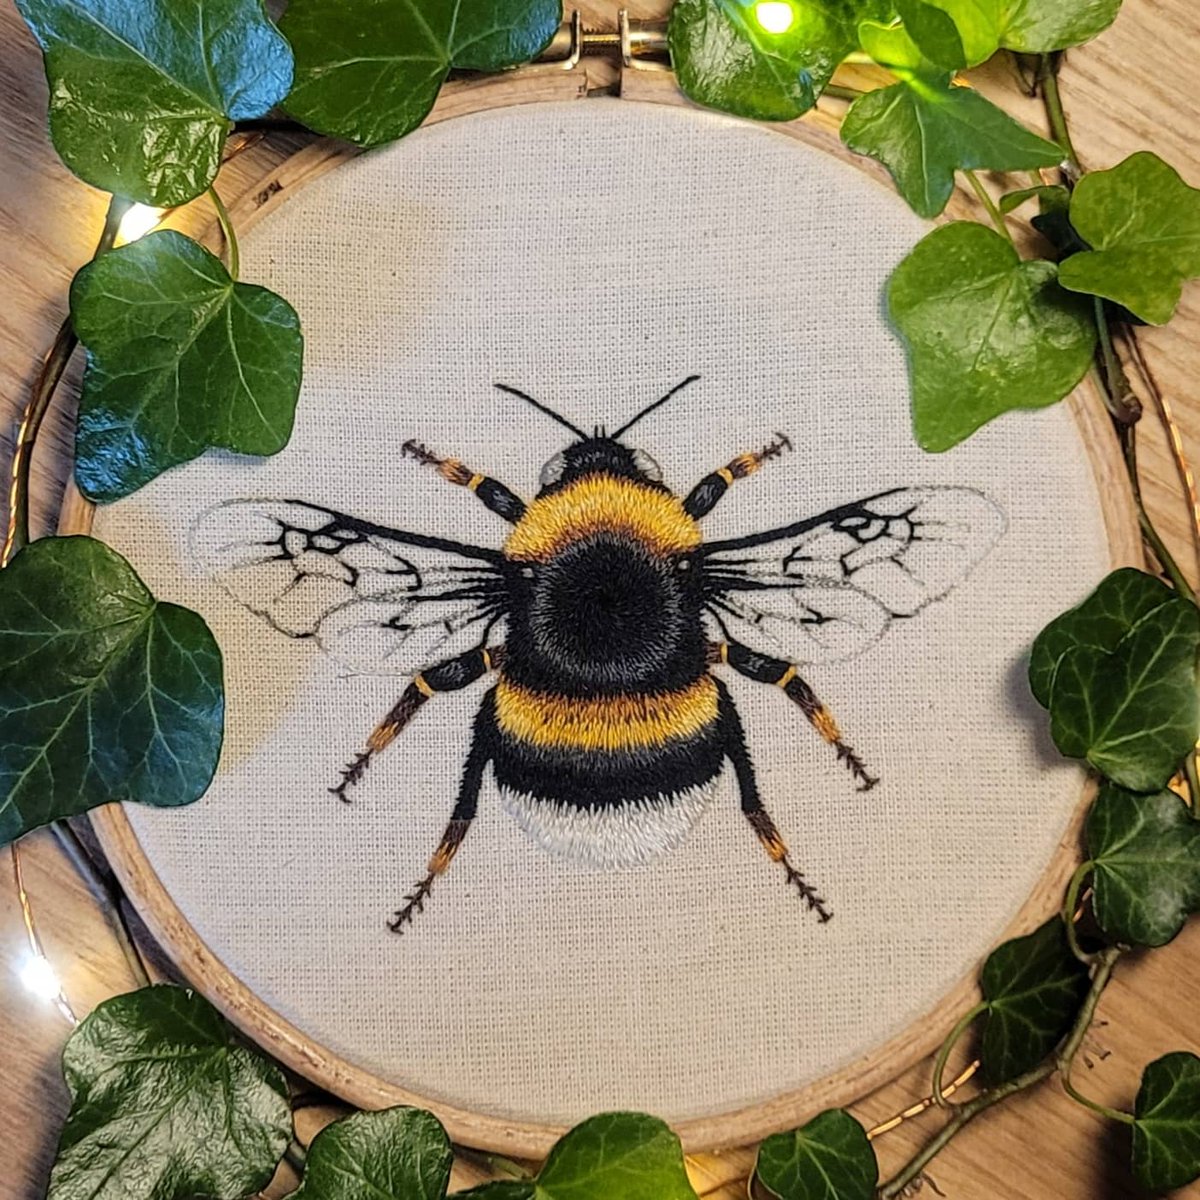 Pretty happy with my first attempt at #needlepainting embroidery 🐝🧵